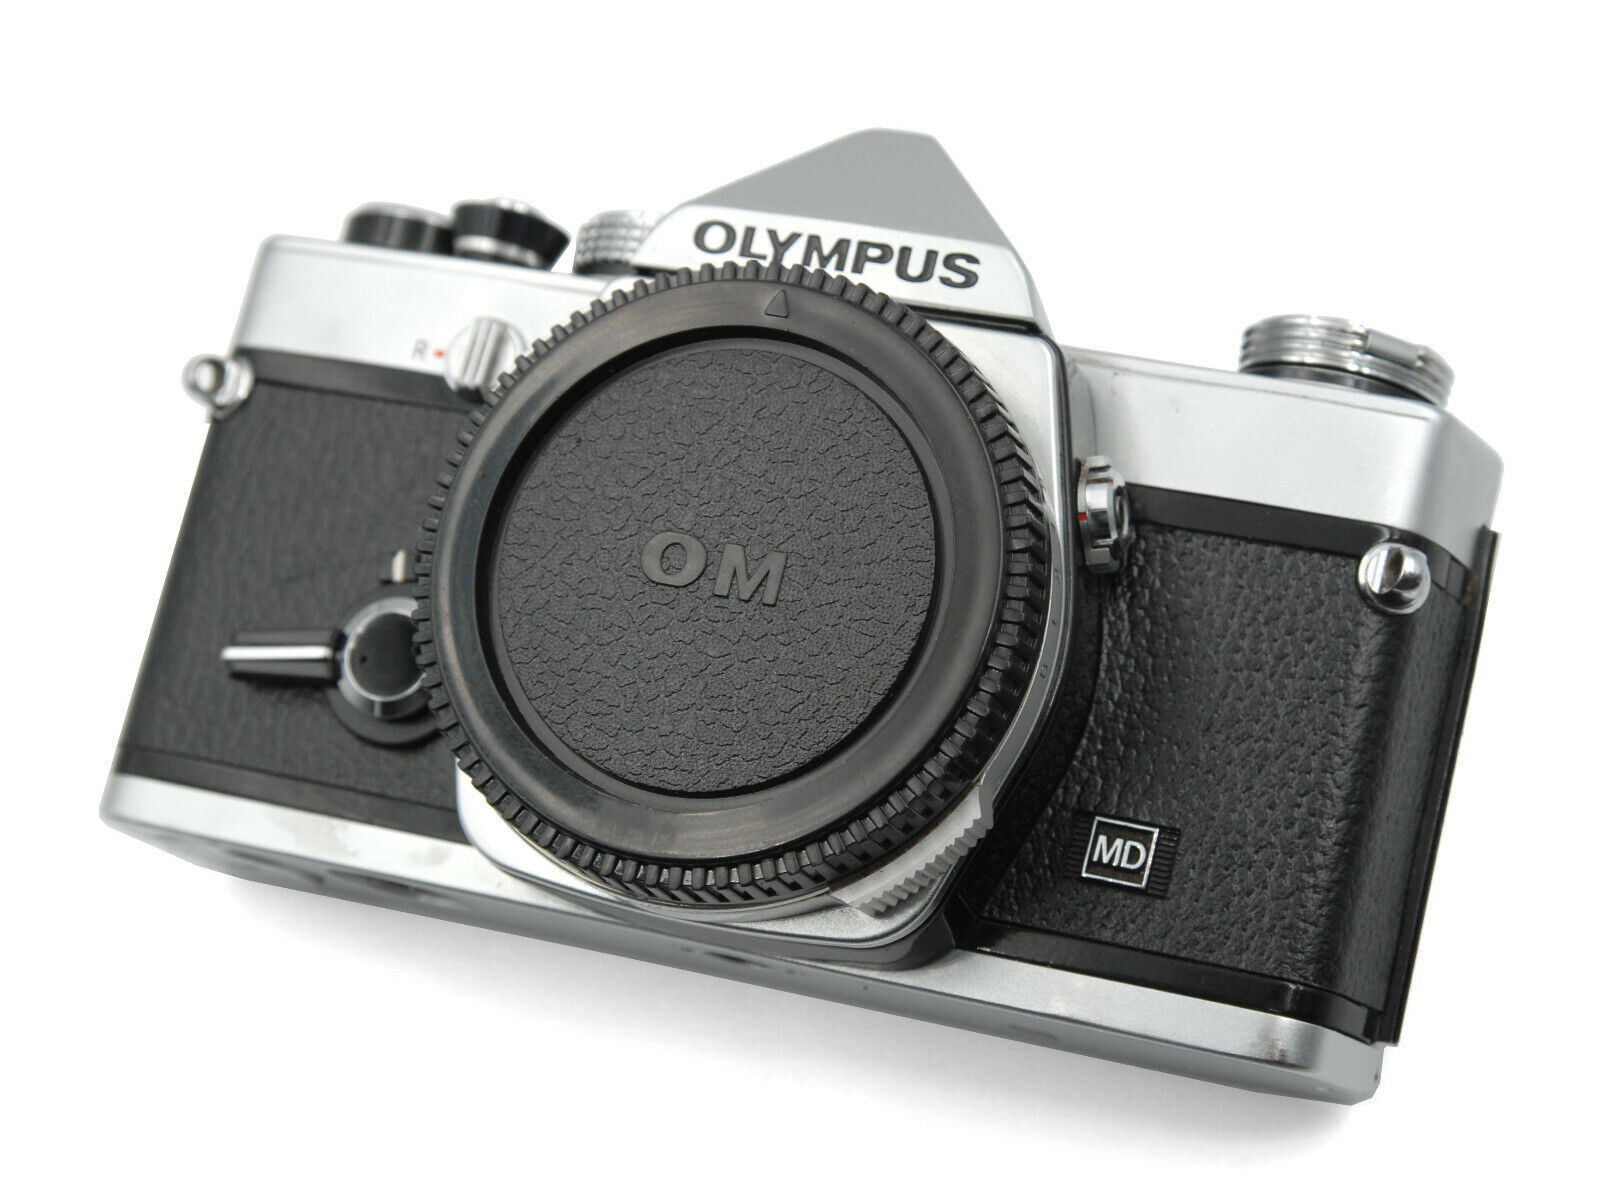 Olympus OM-1 Replacement Cover - Laser Cut Genuine Leather